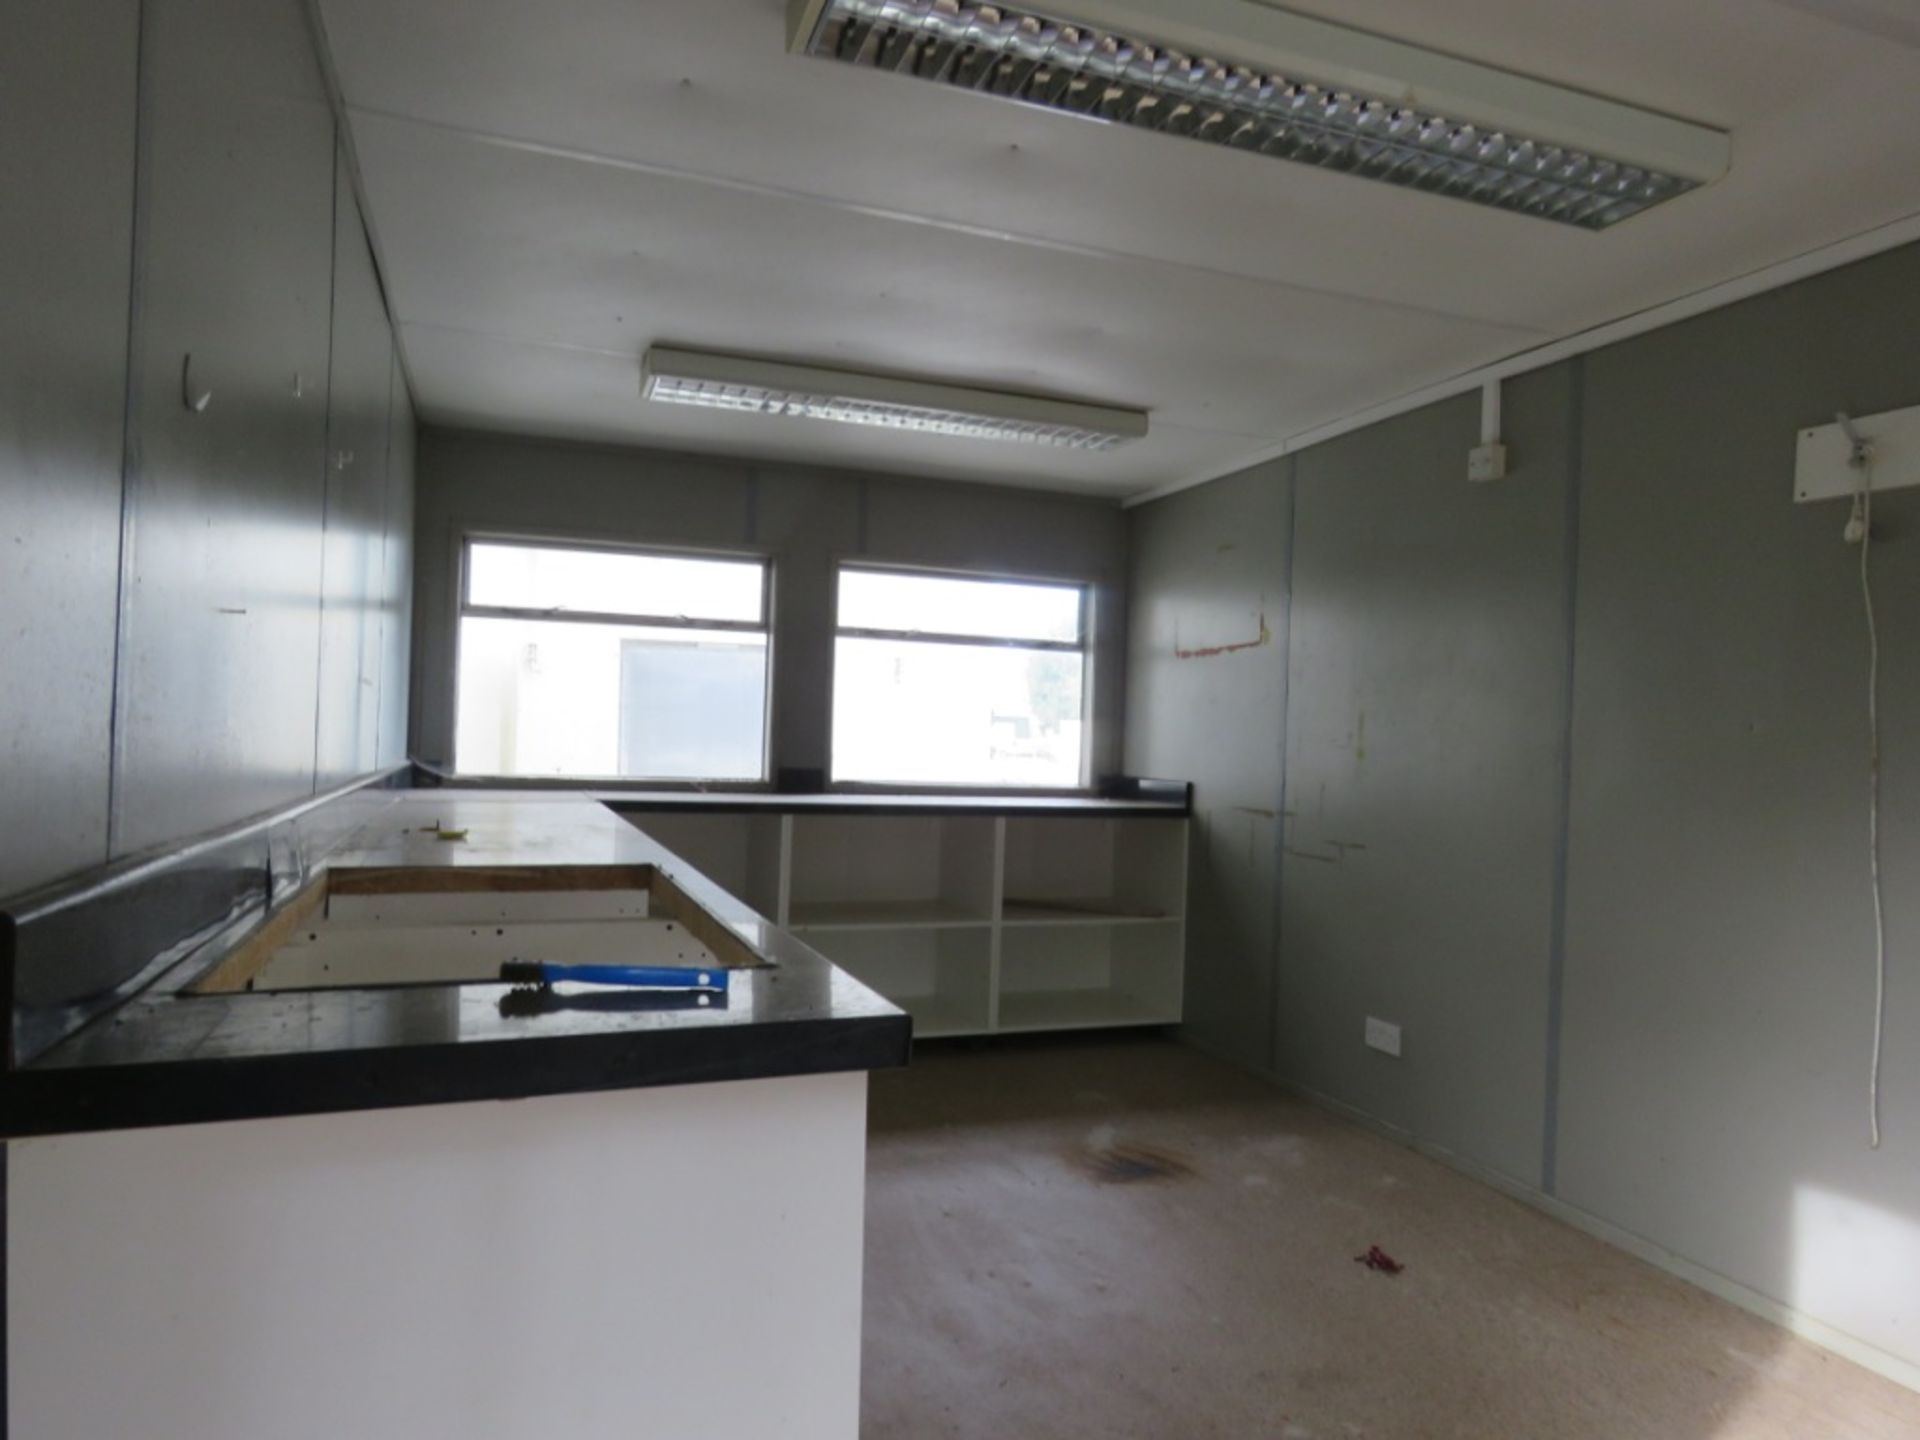 32FT SITE CABIN OFFICE. PREVIOUSLY USED ON HOUSE BUILDING PROJECT. - Image 4 of 4